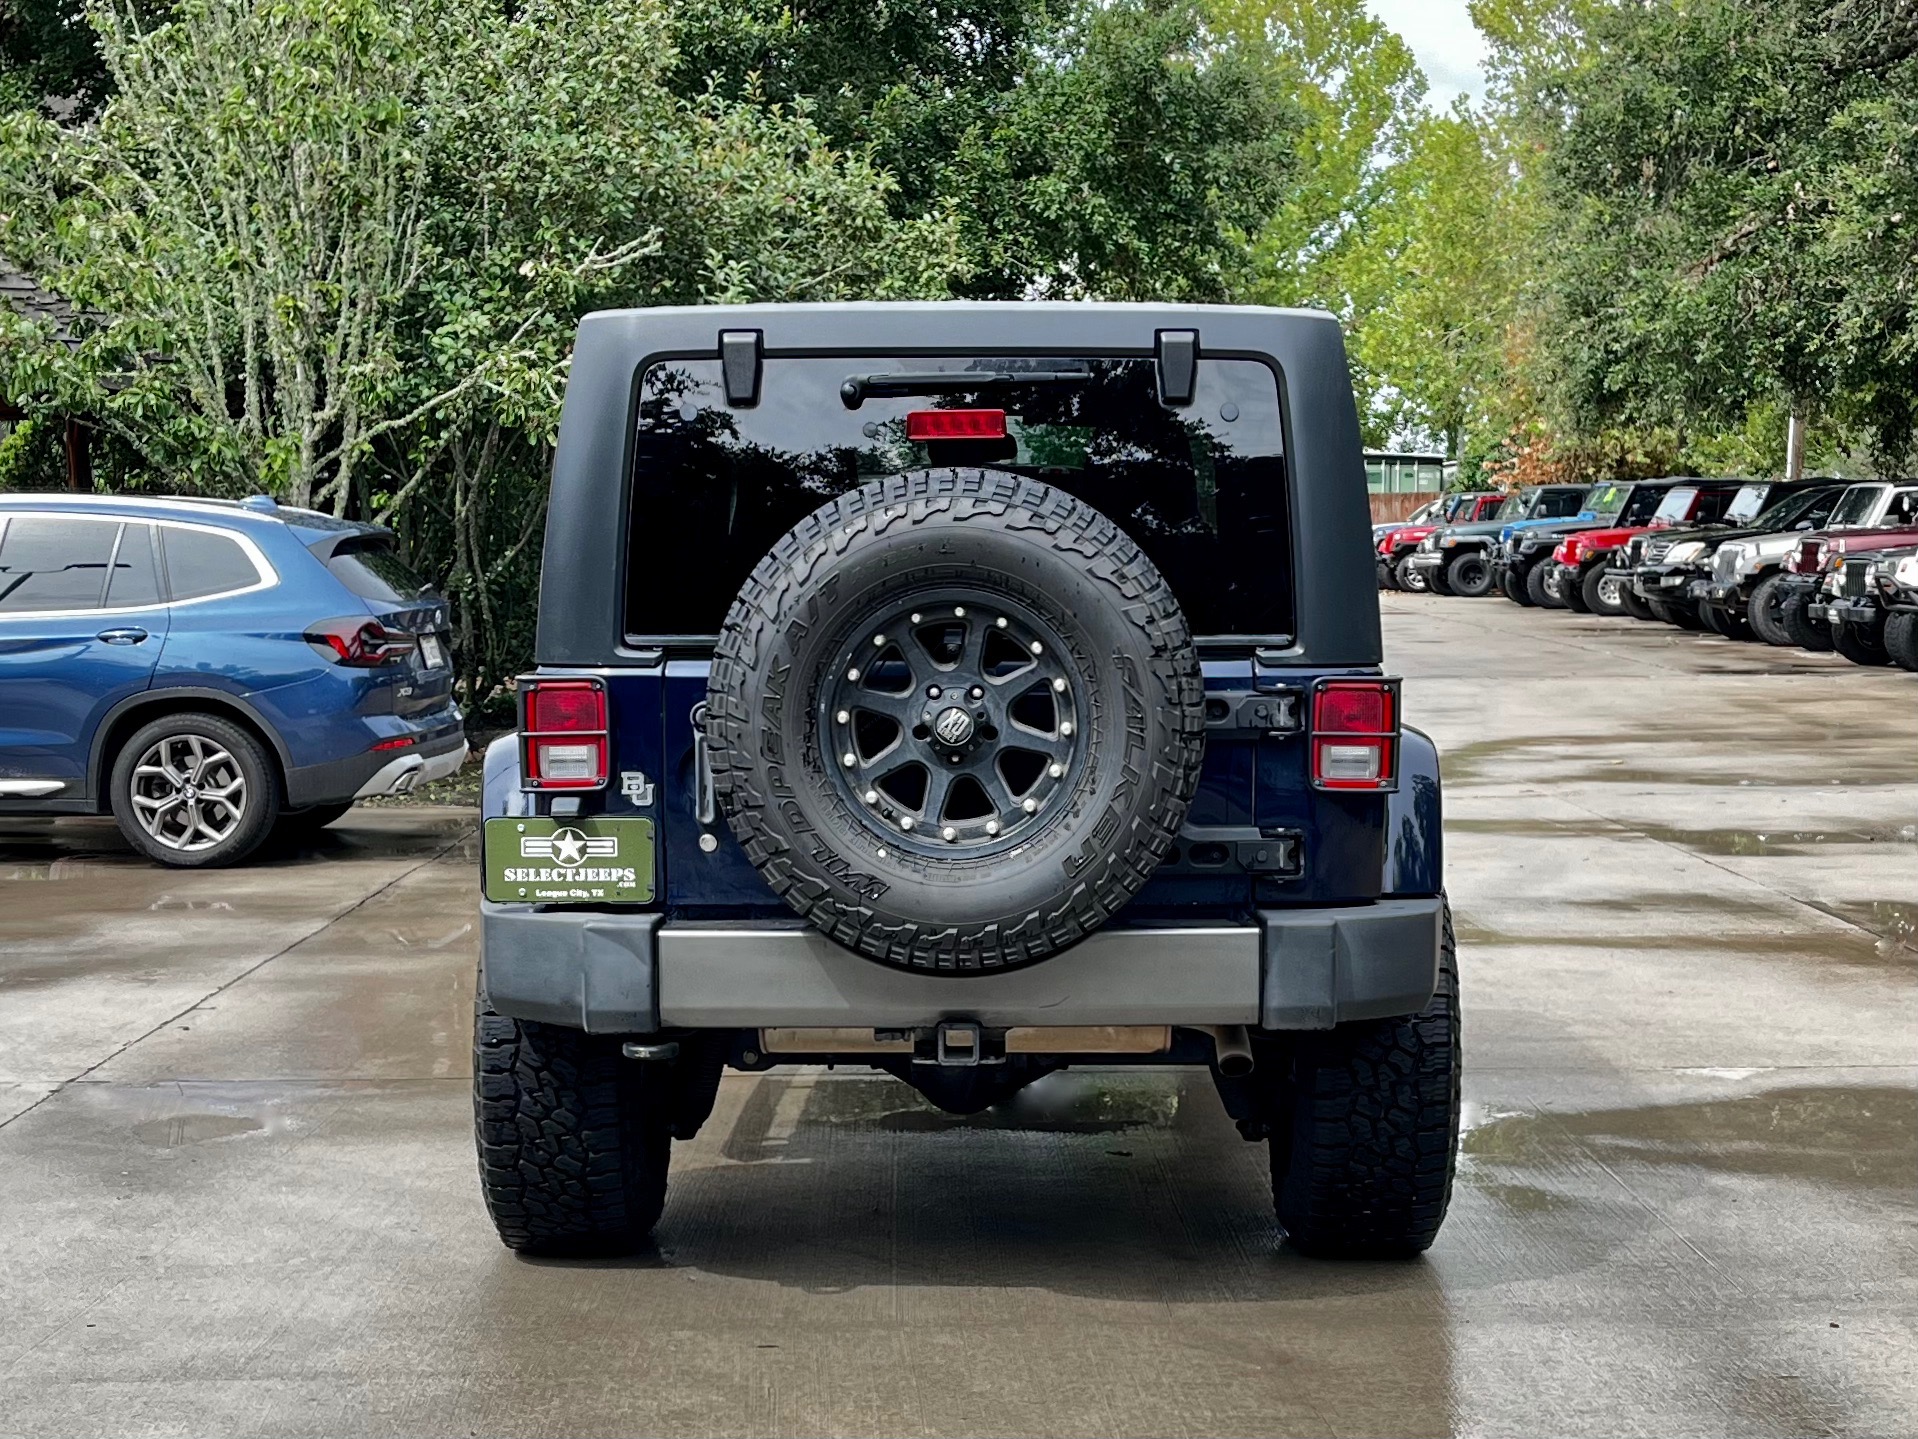 Used-2013-Jeep-Wrangler-Unlimited-Freedom-Edition